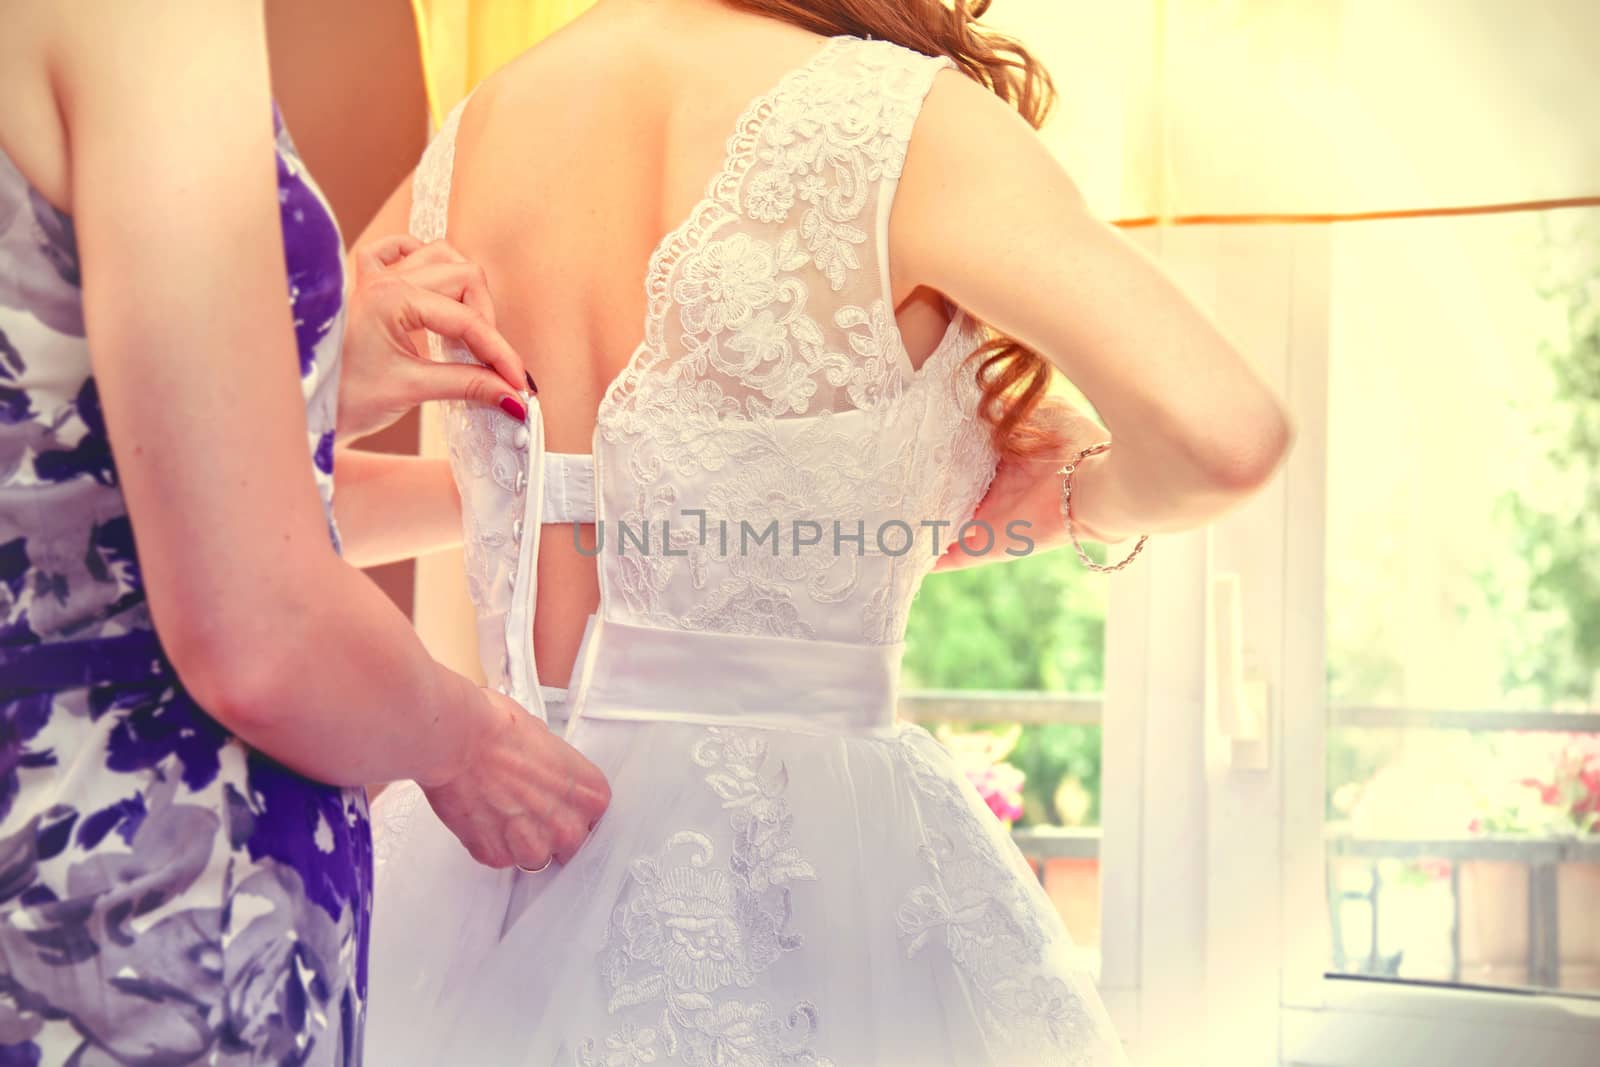 Young bride dresses for wedding. Marriage and wedding concept image.